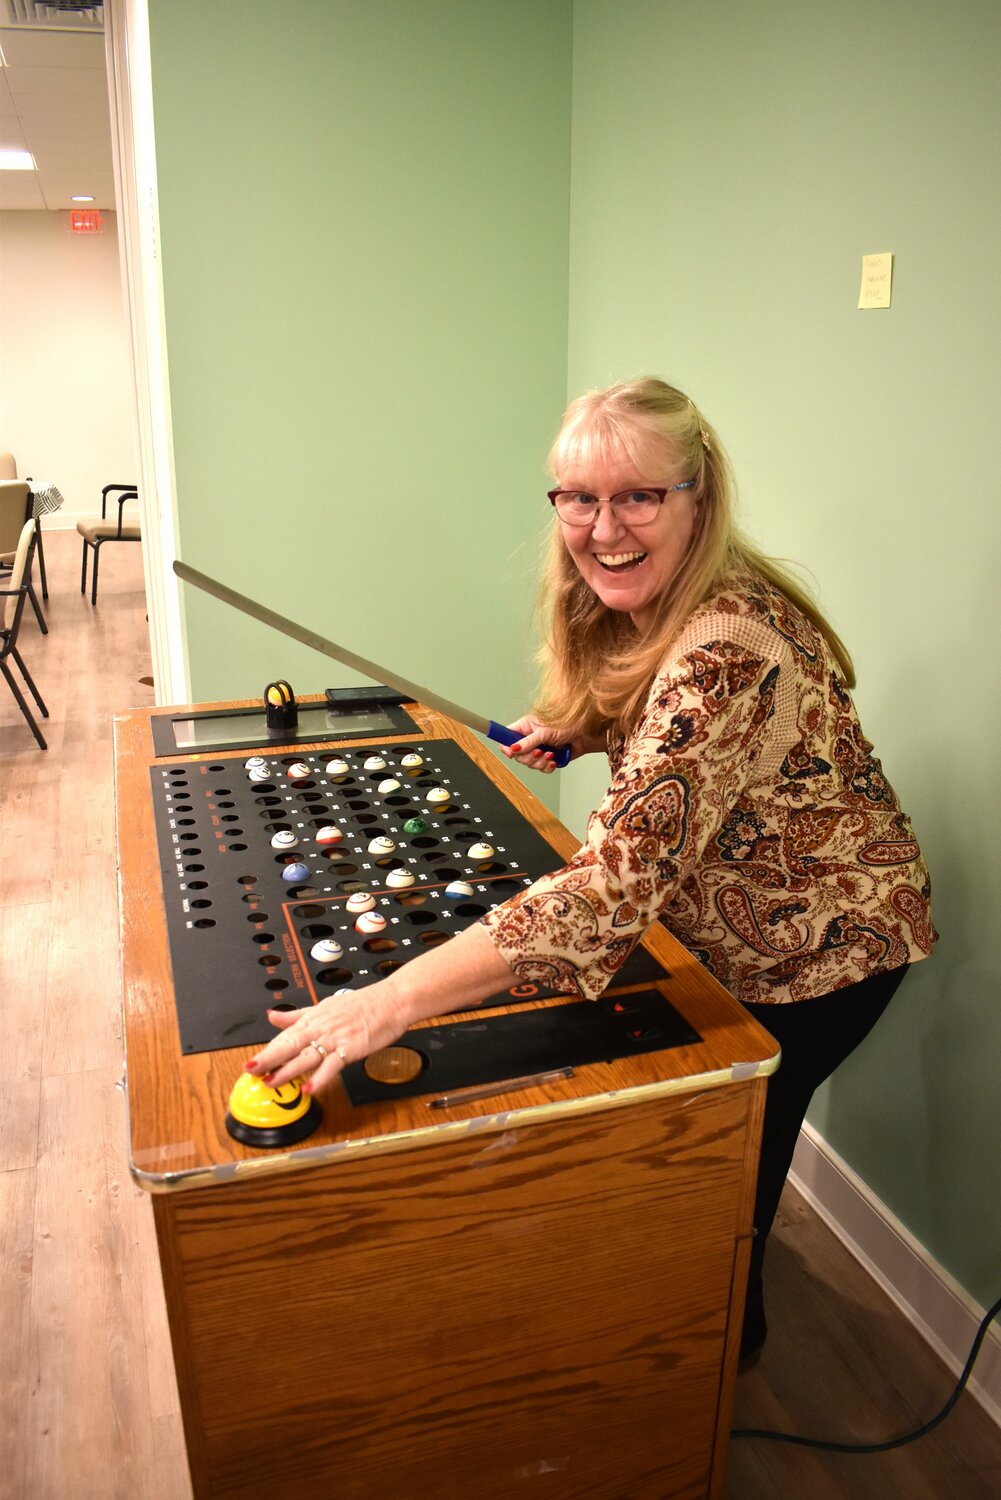 Cathy Koyanagi of the Dorchester Banner proved to be an enthusiastic Bingo caller at Thrive Dorchester 2023, hosted by the Banner at the Weinberg Intergenerational Center.